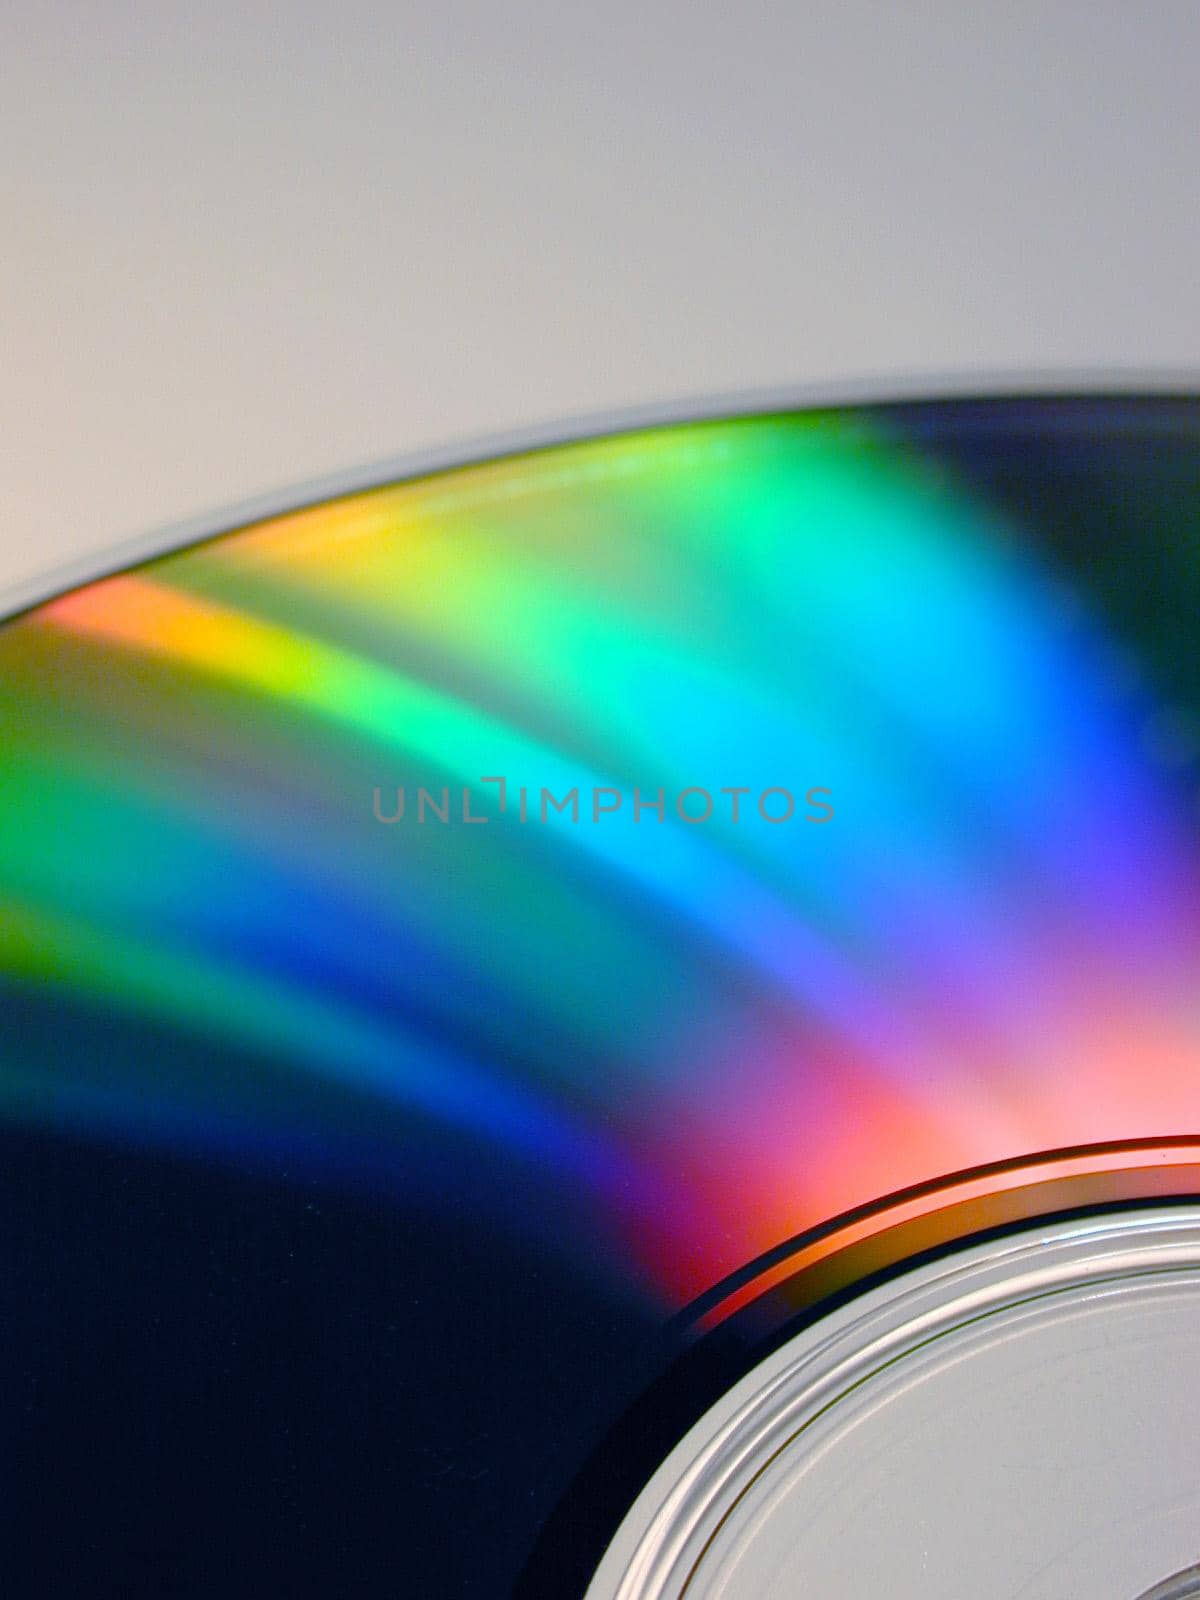 Bright colorful iridescent refraction of light on a DVD or CD in the colors of the spectrum or rainbow in a close up view